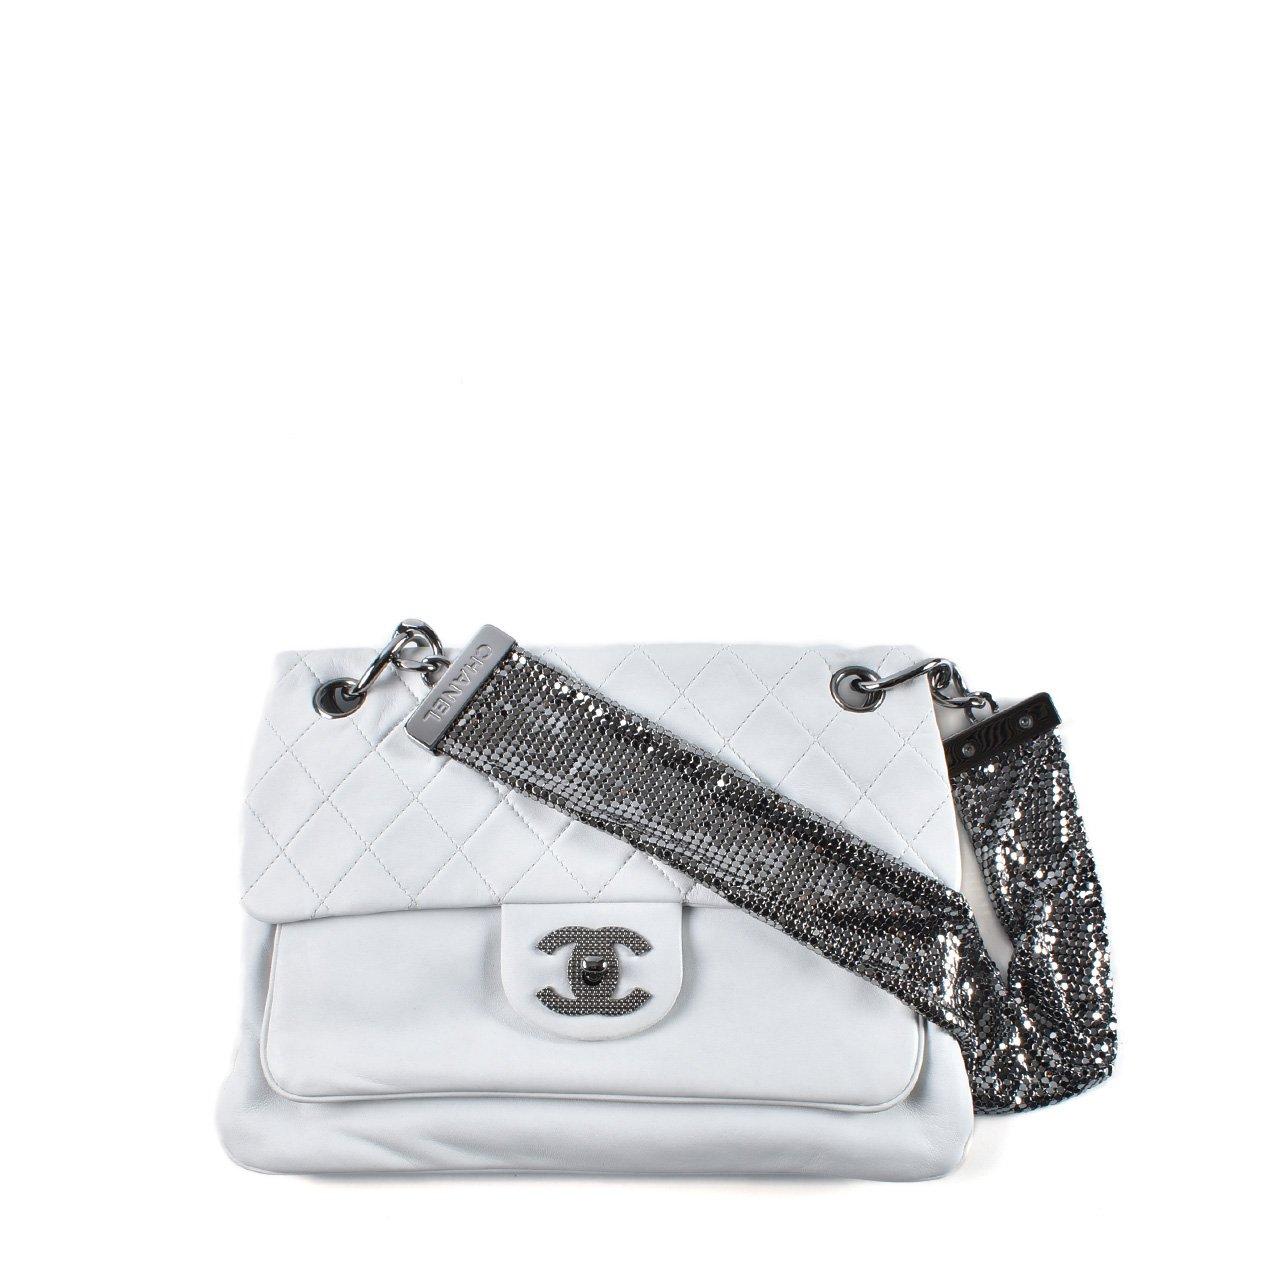 Chanel 2009 Metallic Mesh Limited Edition Soft Lambskin White Classic Flap Bag For Sale 2